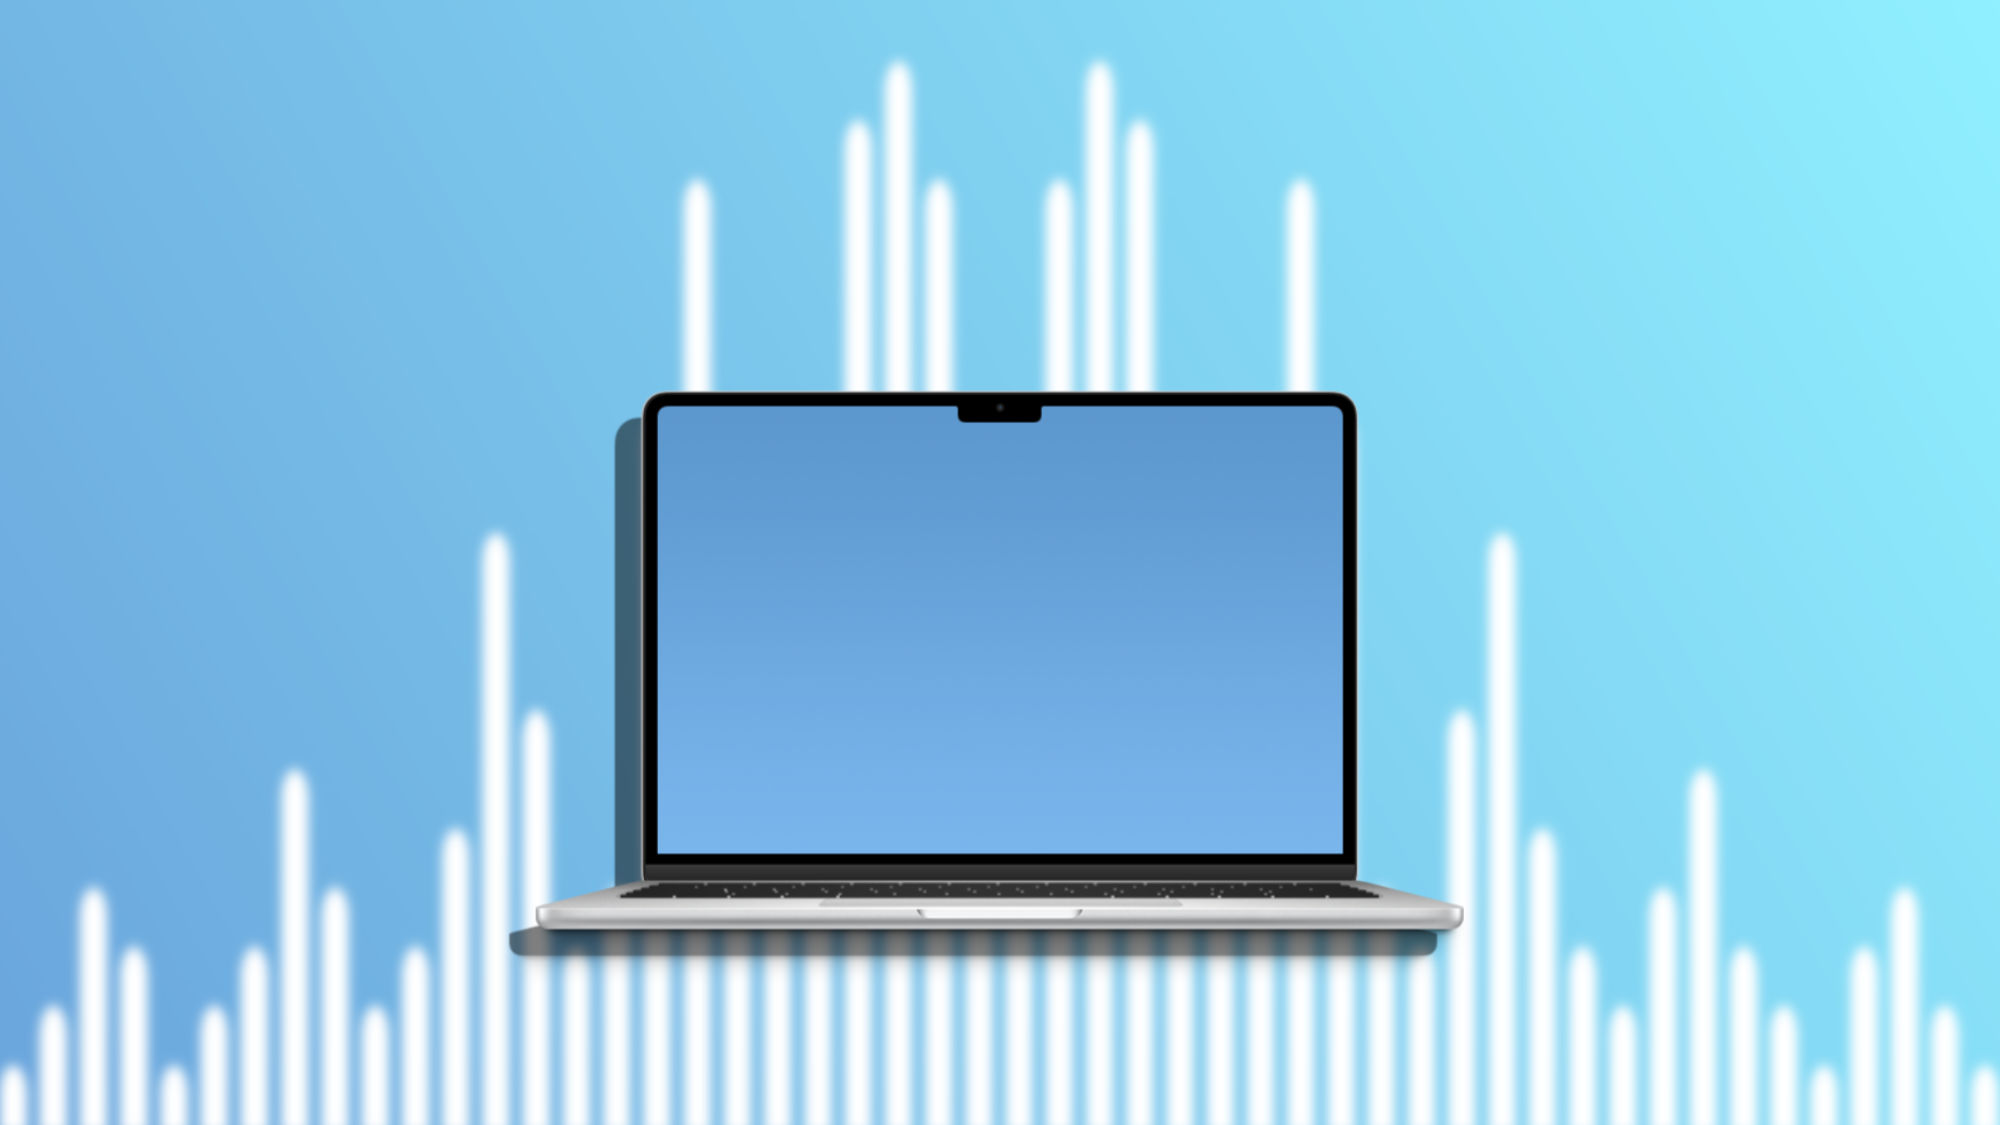 How to Play Ambient Sounds on Our Mac Without Third-Party Apps or Internet Connection